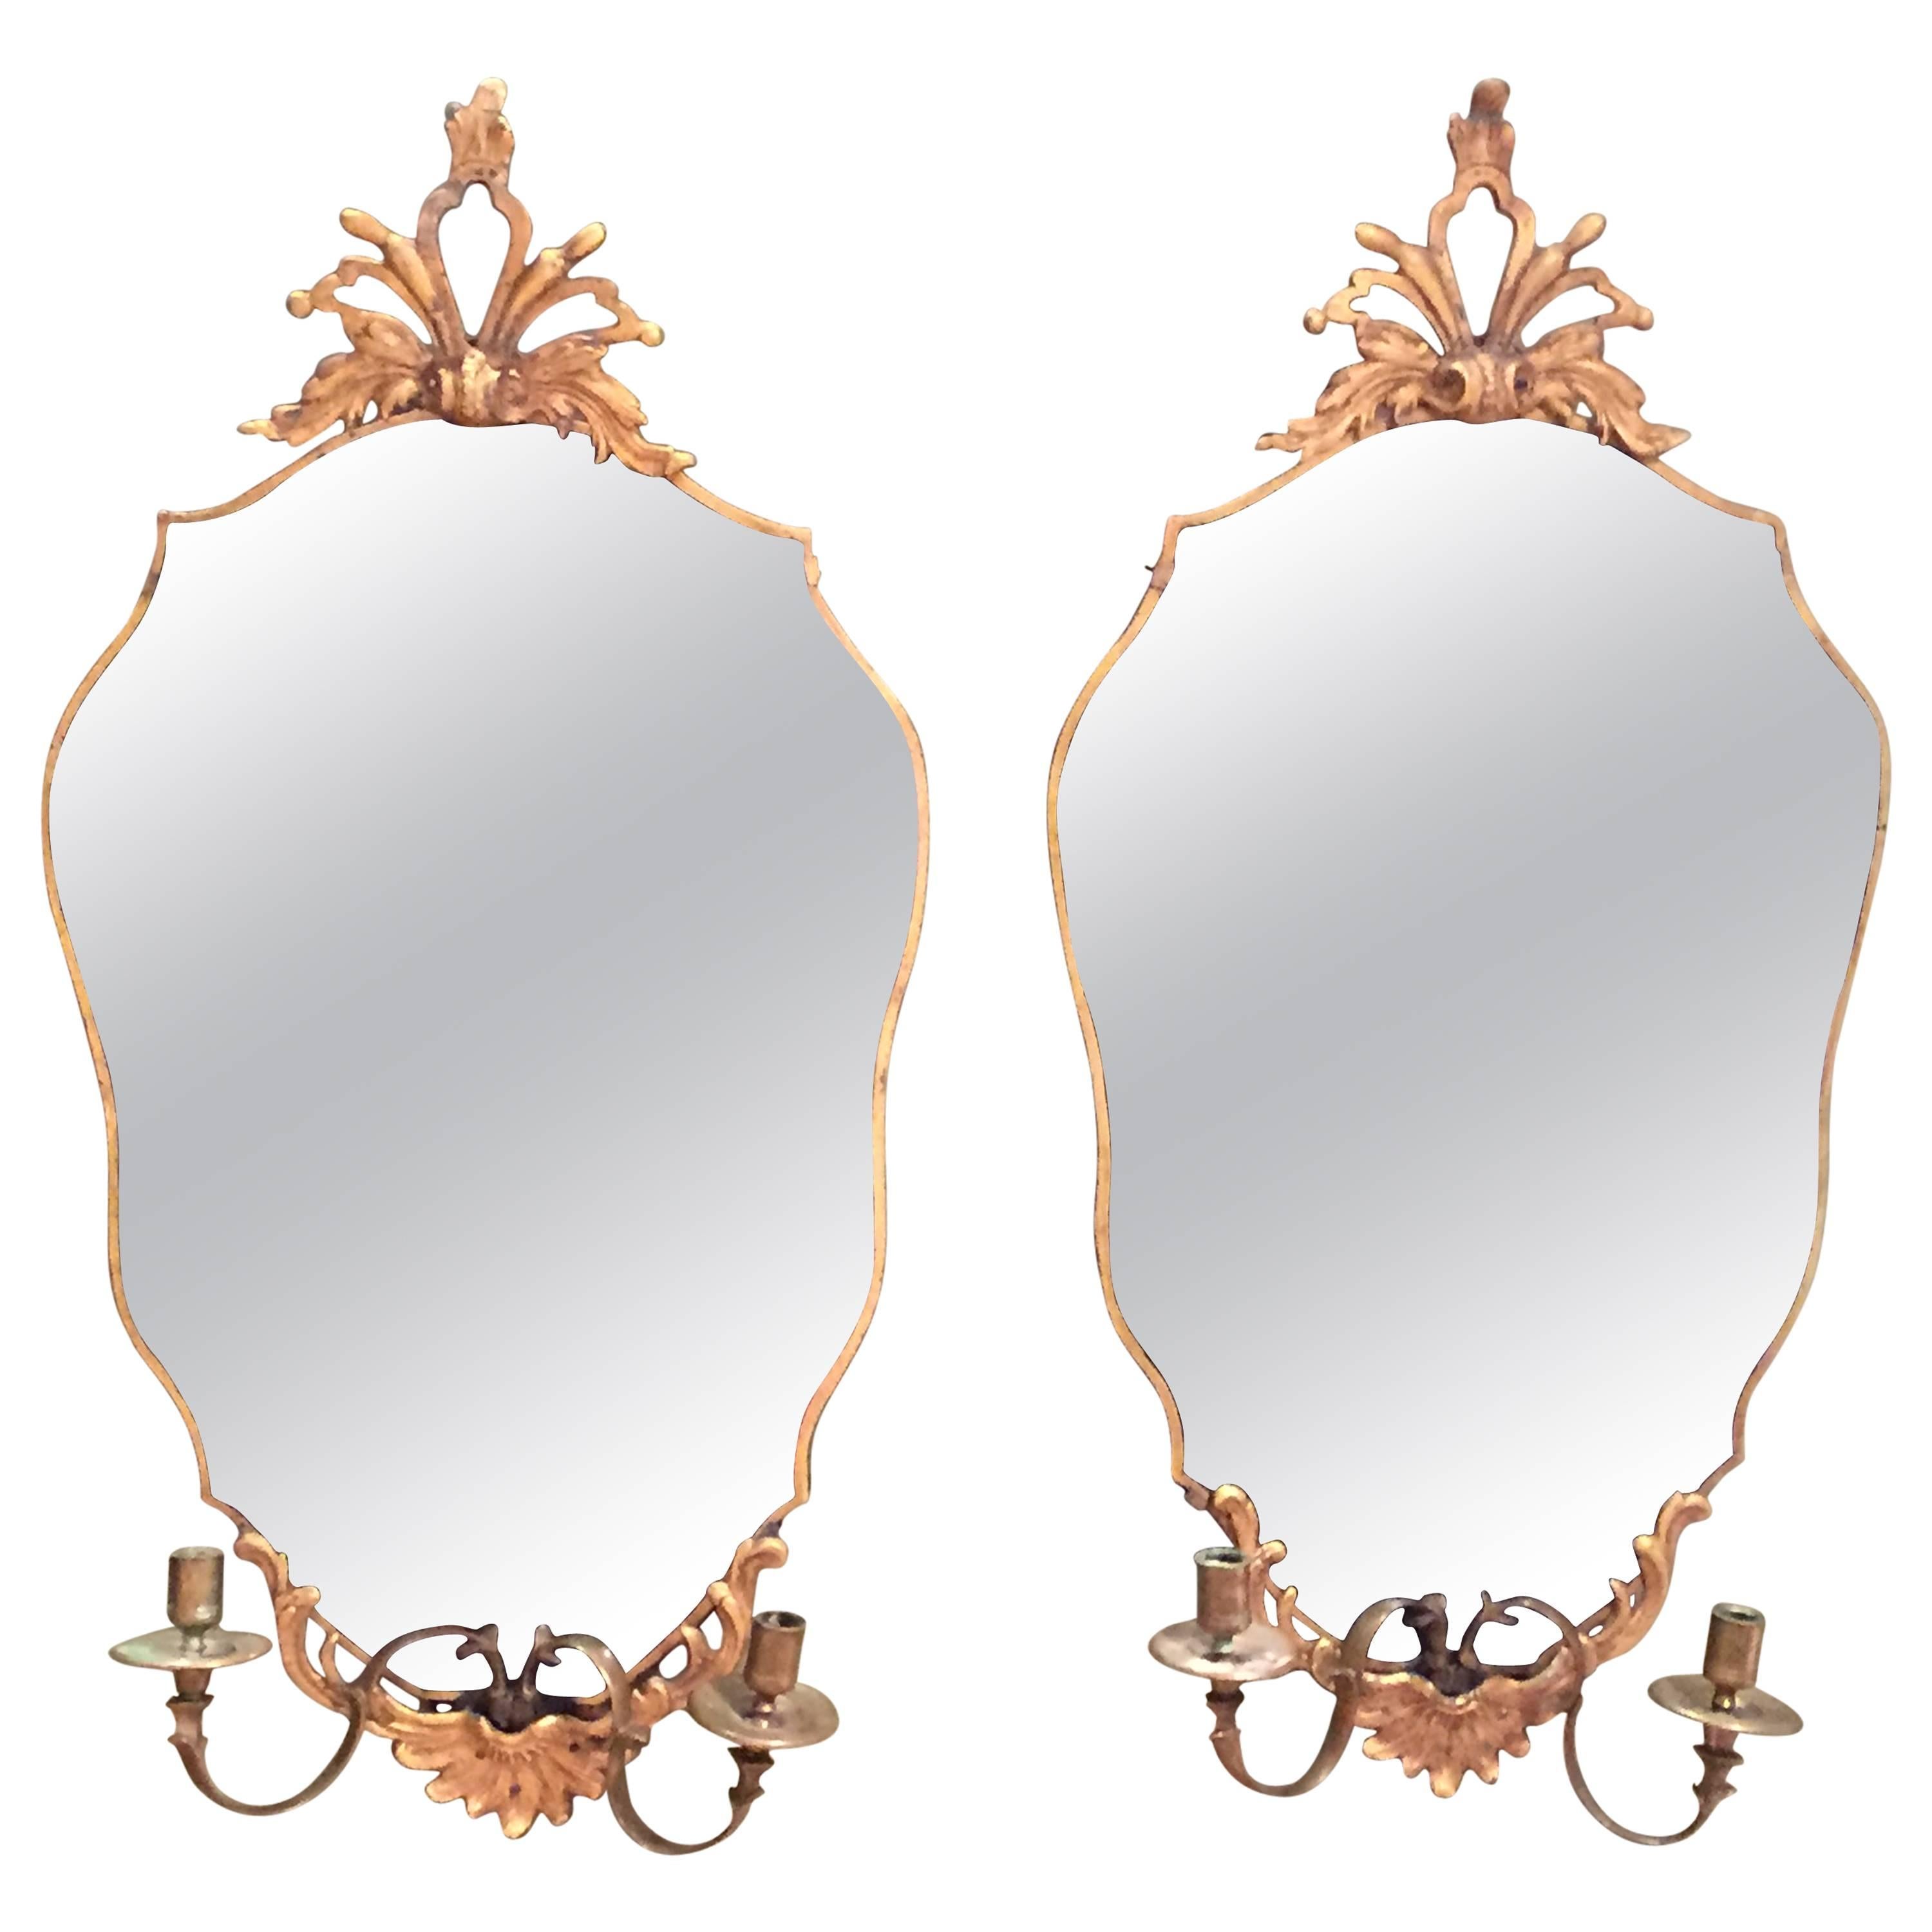 Pair of Continental Mirrored Sconces with Candelabra Arms